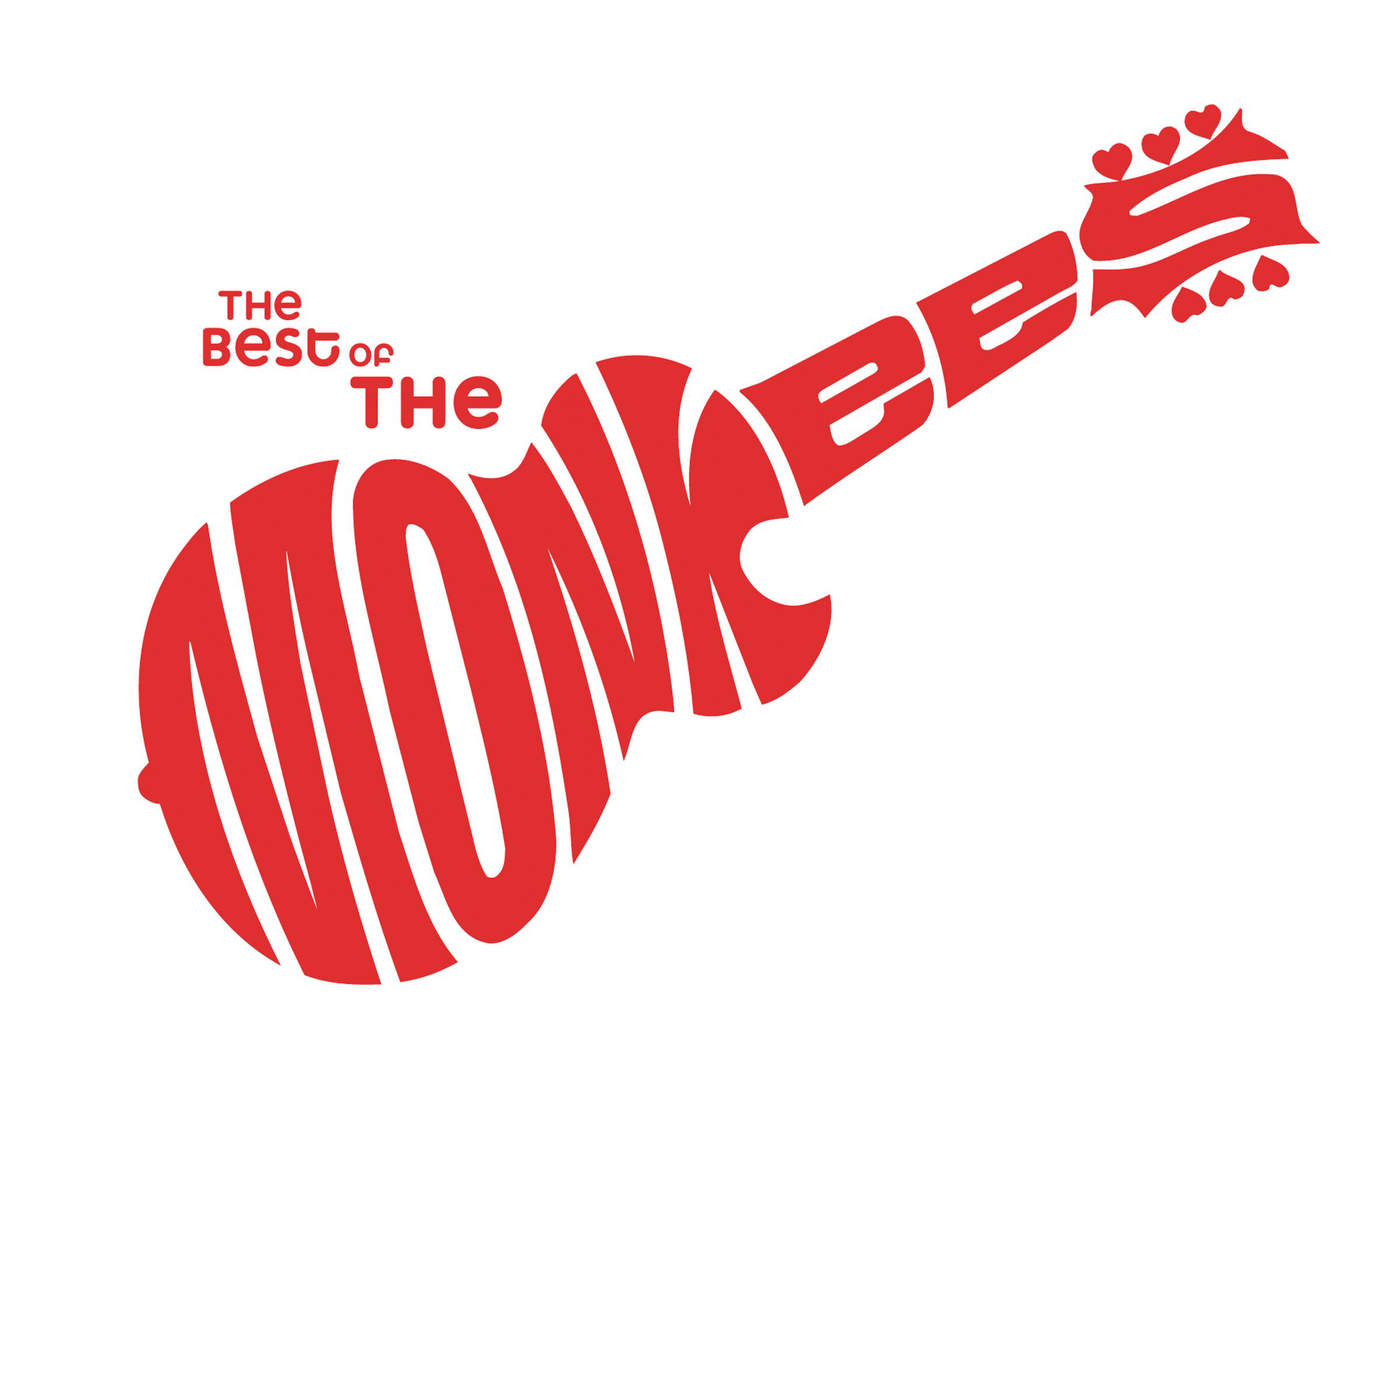 Art for I'm a Believer by The Monkees